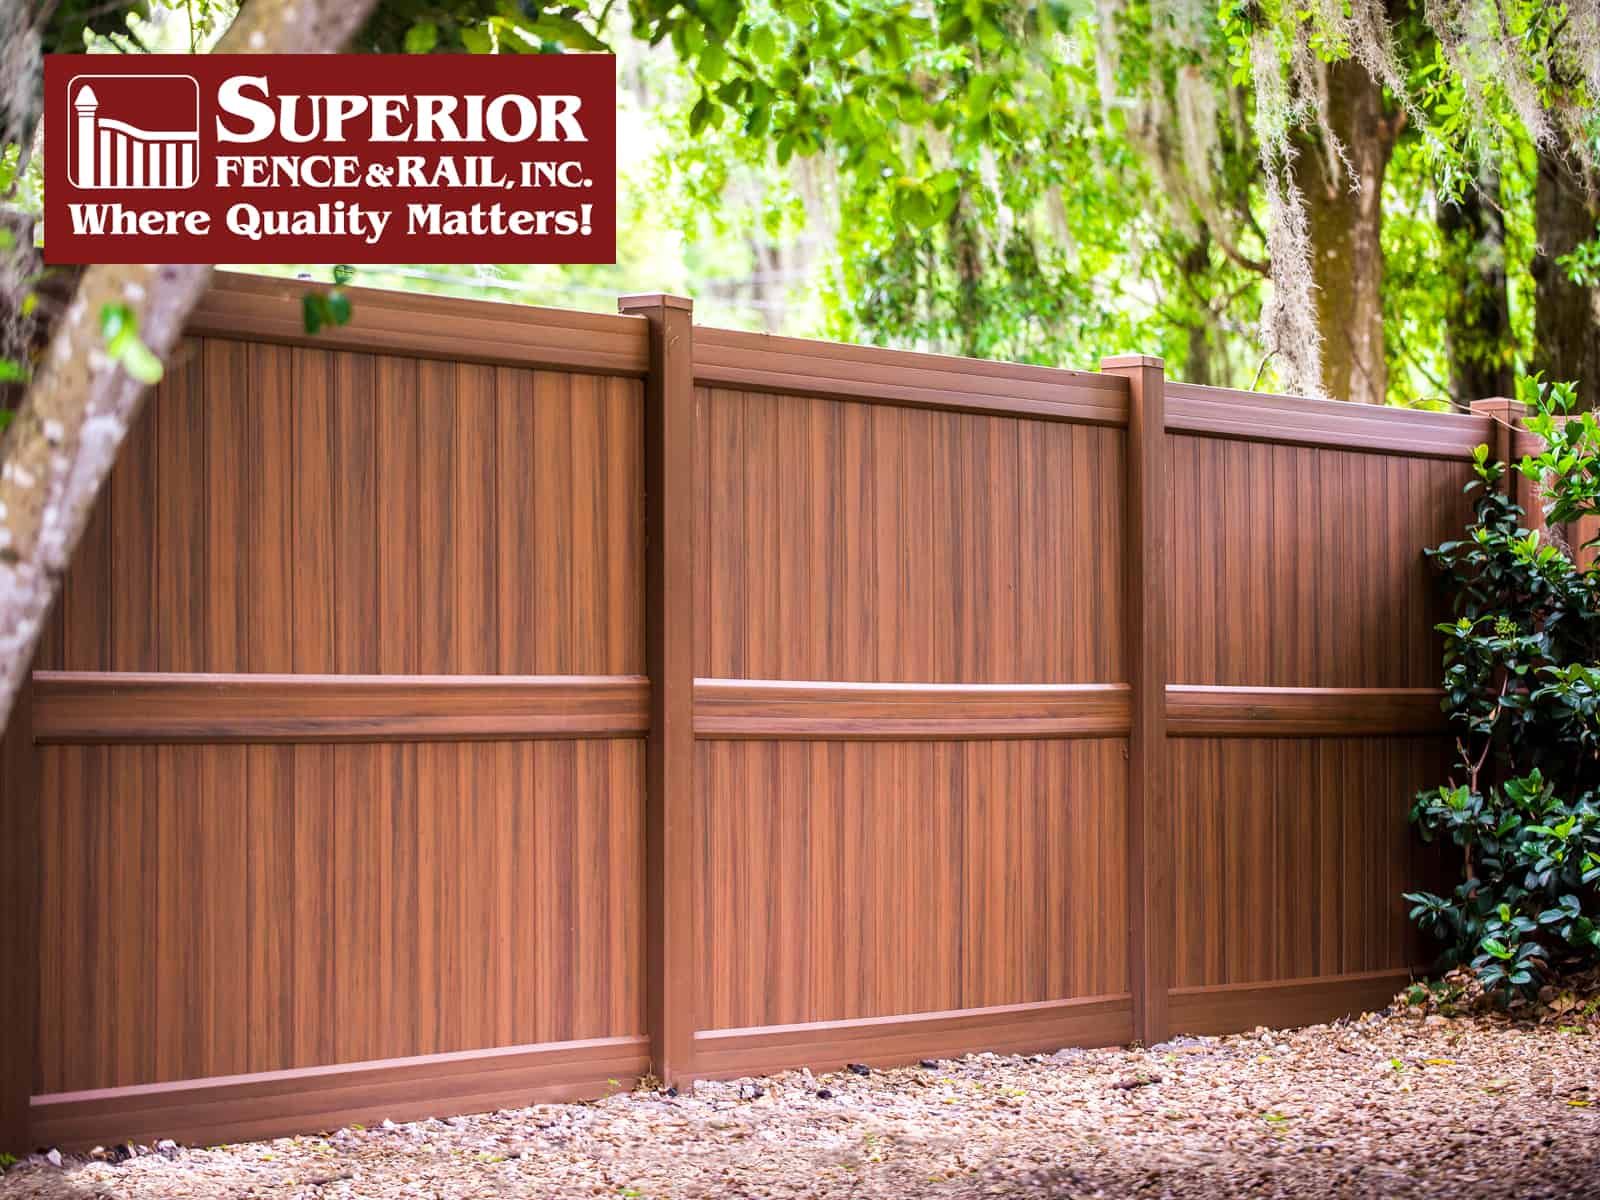 https://www.superiorfenceandrail.com/wp-content/uploads/2022/07/Fishers-Fence-Company-Contractor.jpg